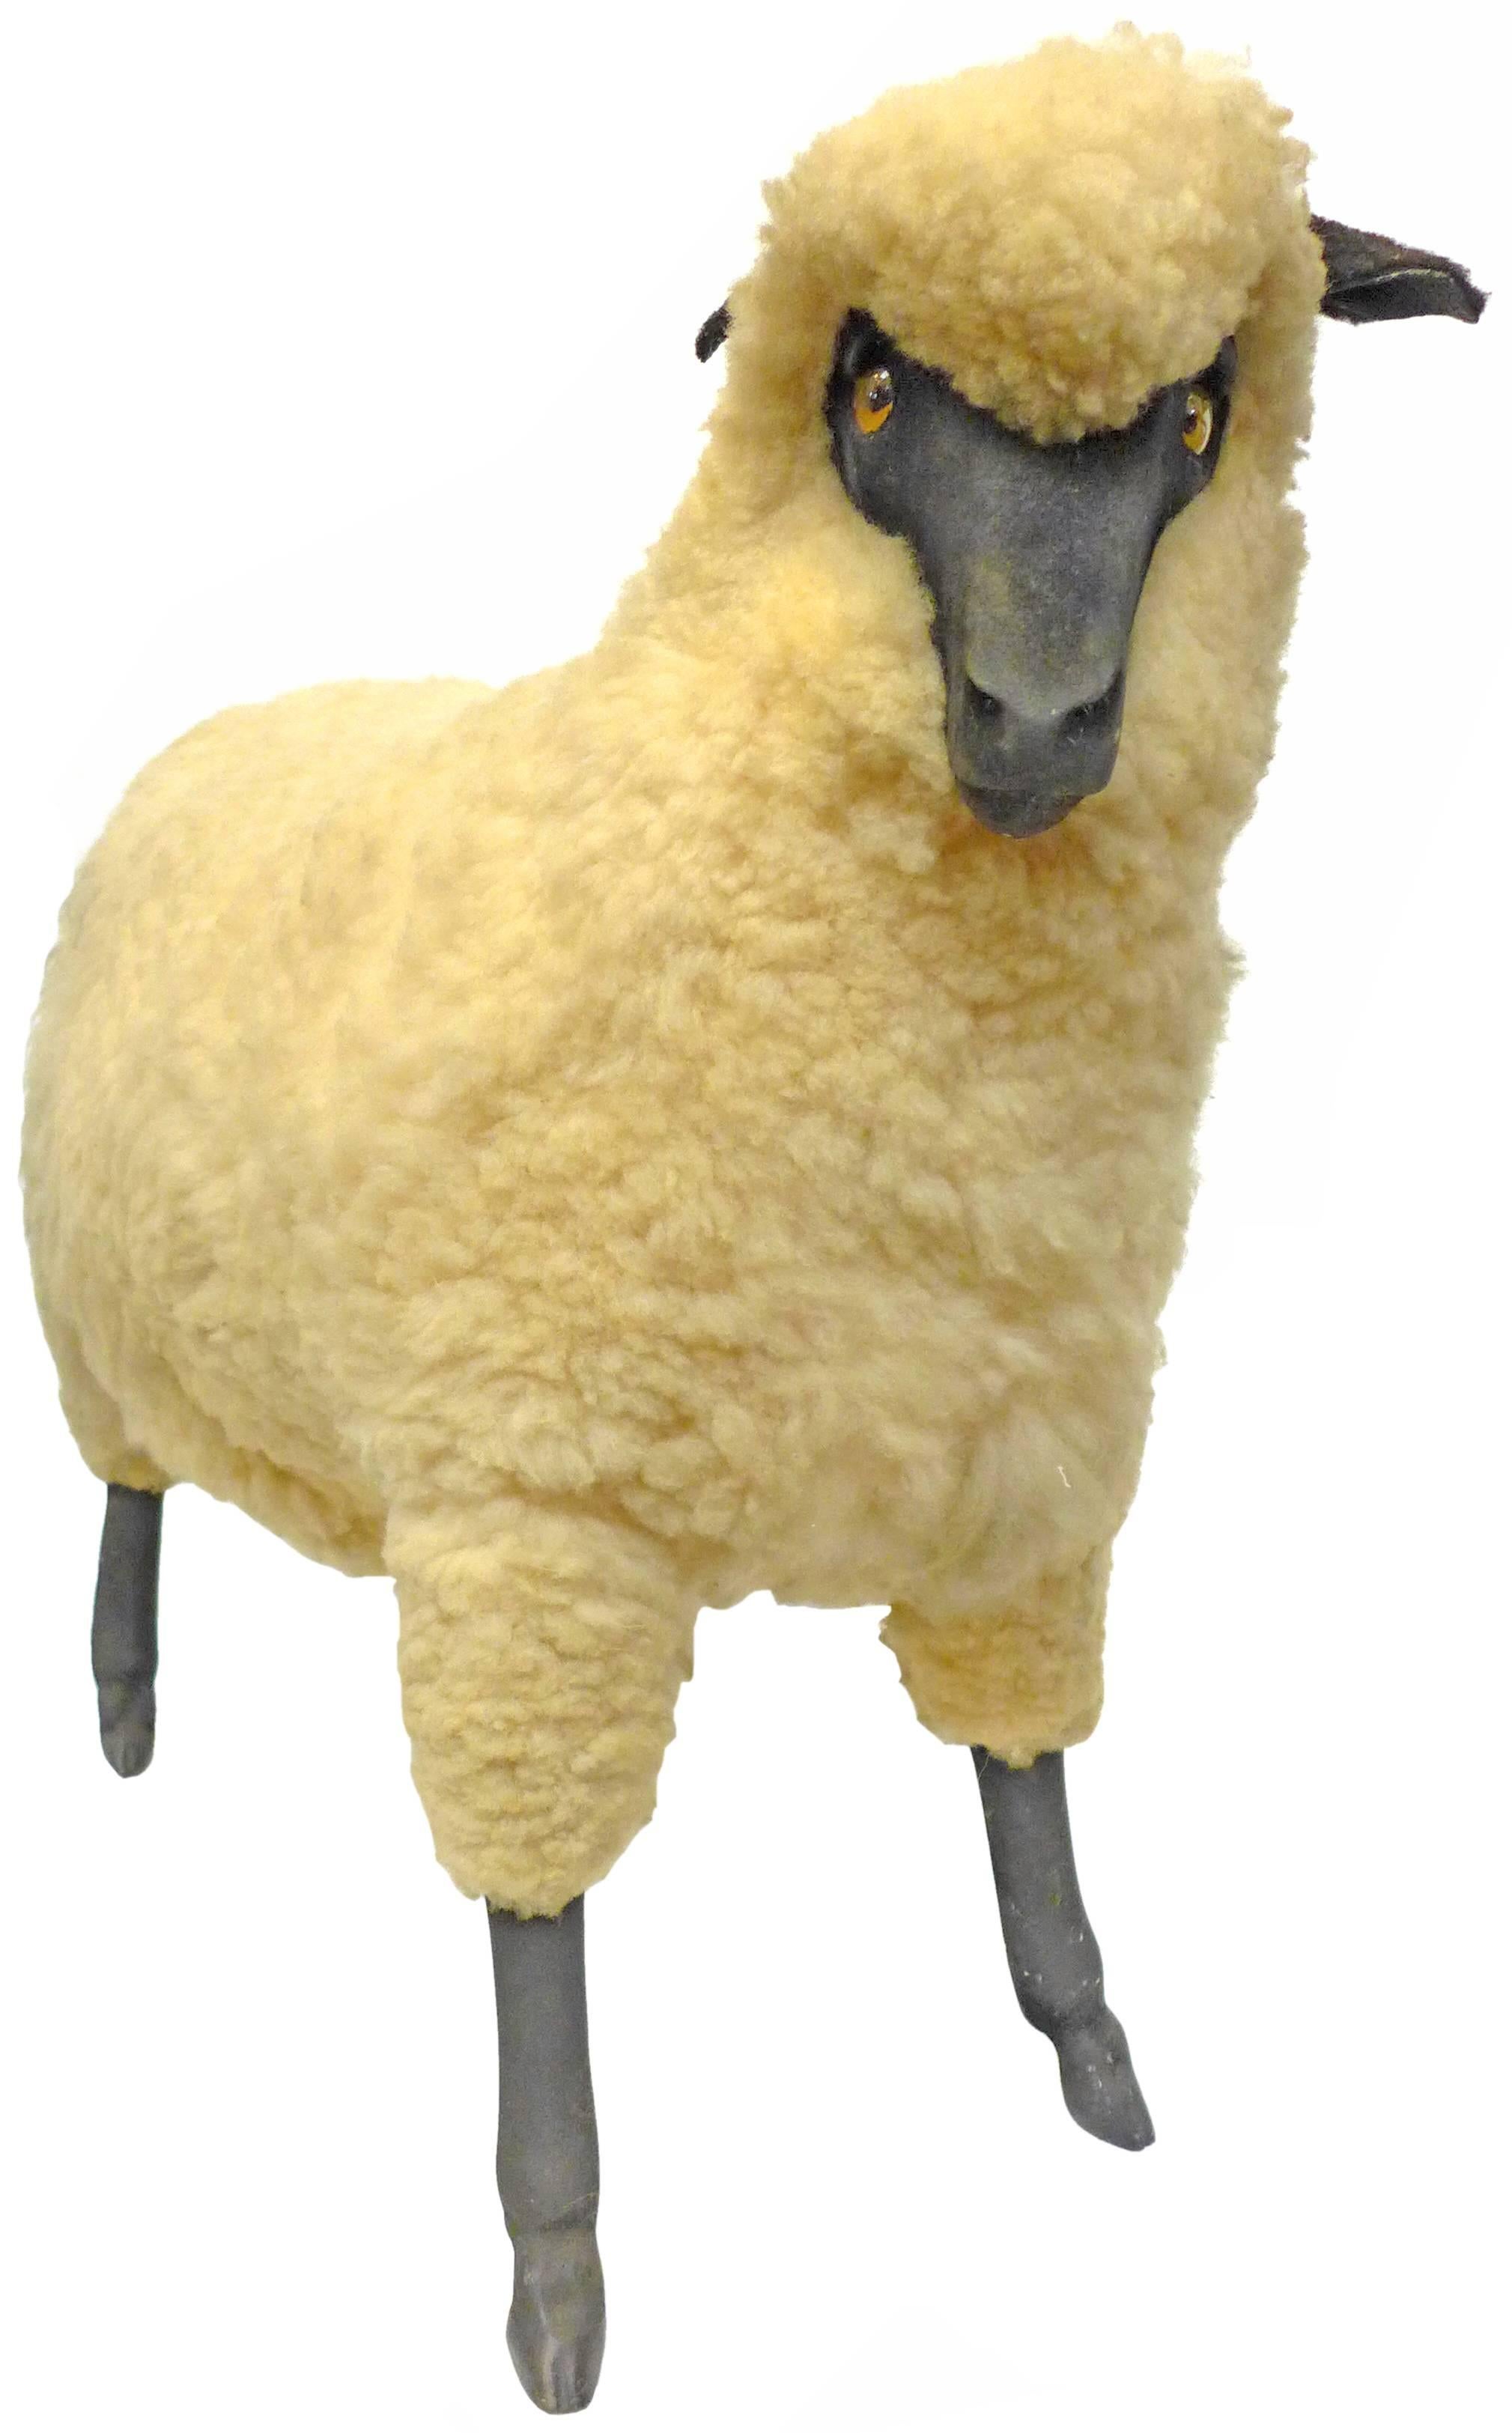 A fantastic, vintage sheep sculpture after those made famous by Francois Xavier Lalanne. Original sheep-shearling body with resin face and legs, felt ears, and acrylic eyes; a charming and playful, life-sized creature, perfectly captivating a